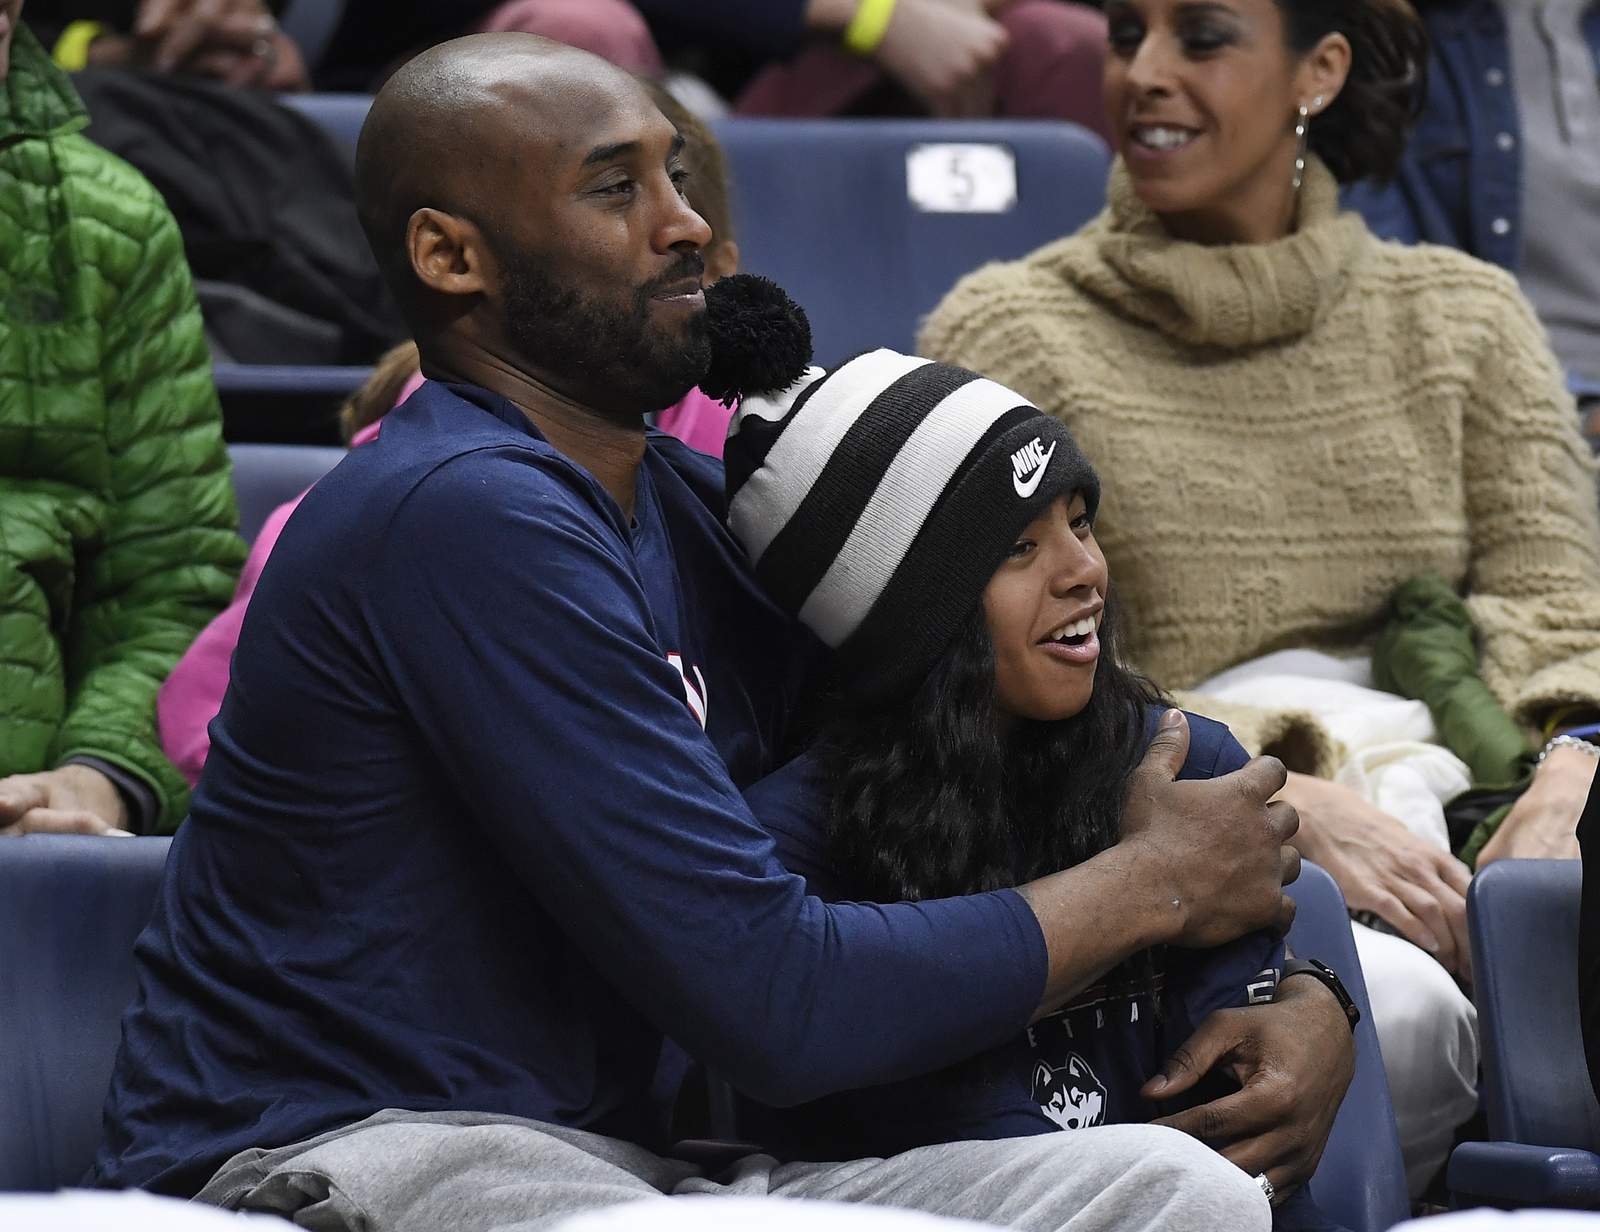 Kobe Bryant's widow expresses grief, anger in online post